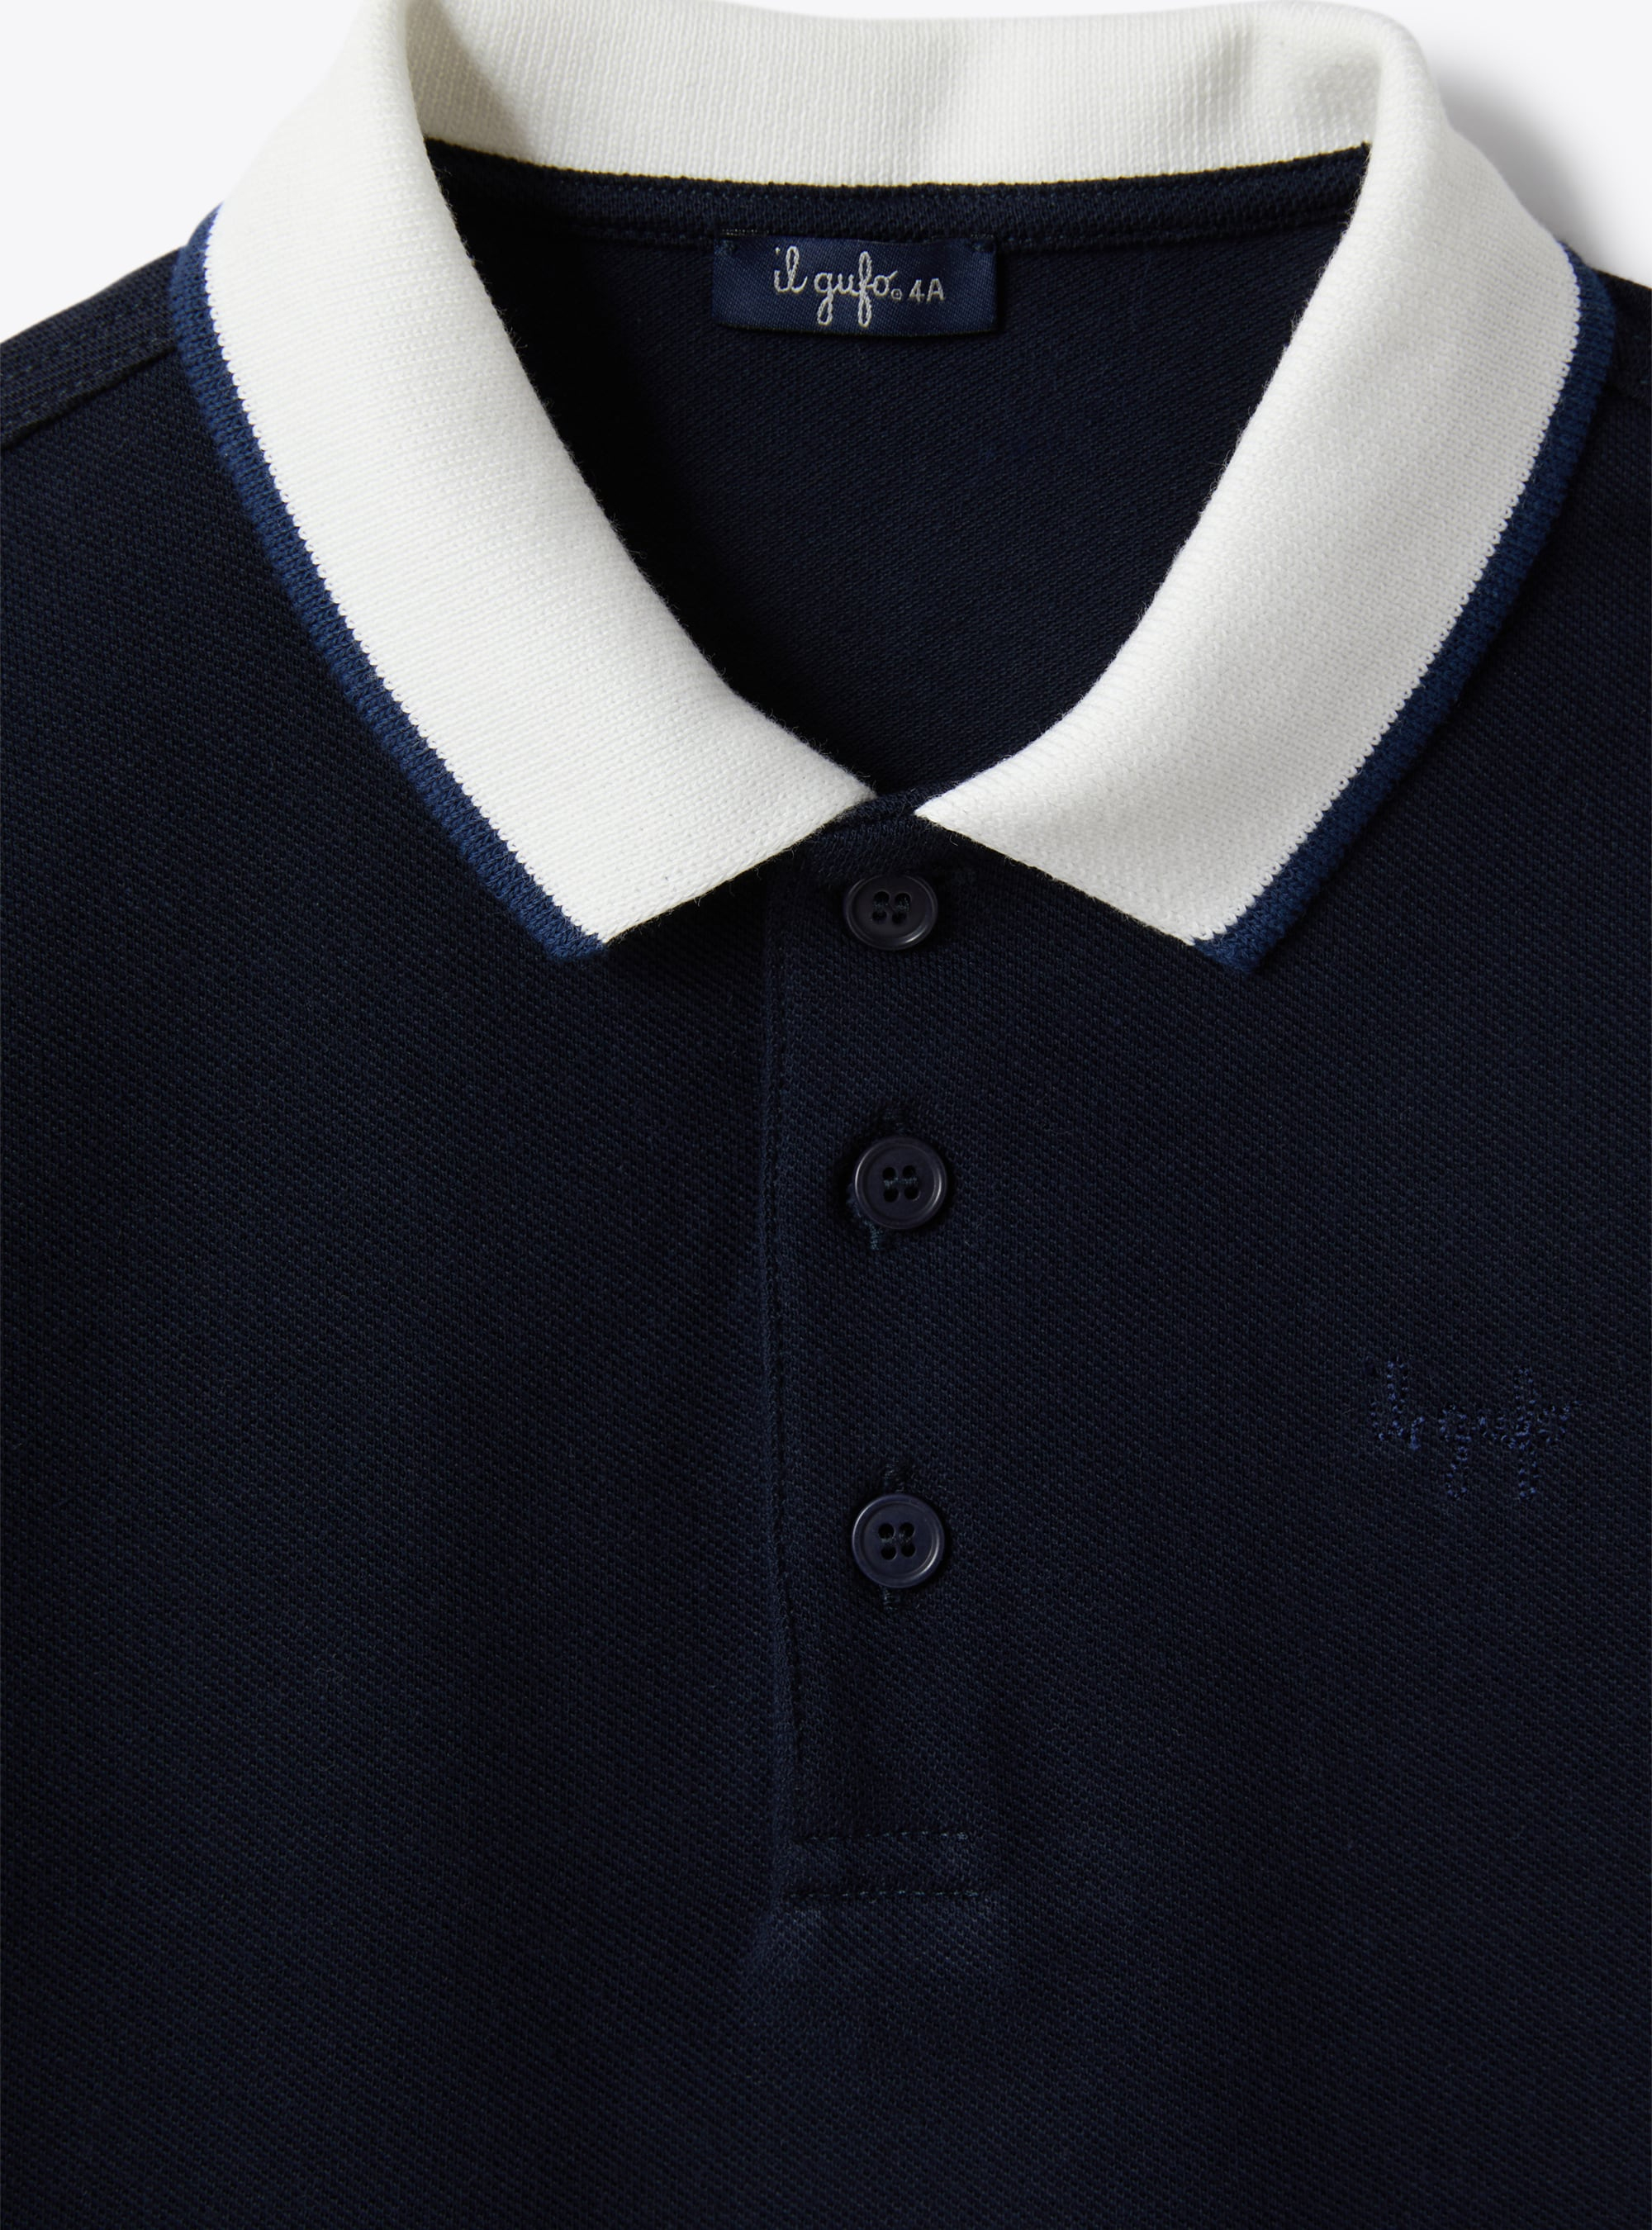 Piqué polo shirt with contrasting detail - Blue | Il Gufo